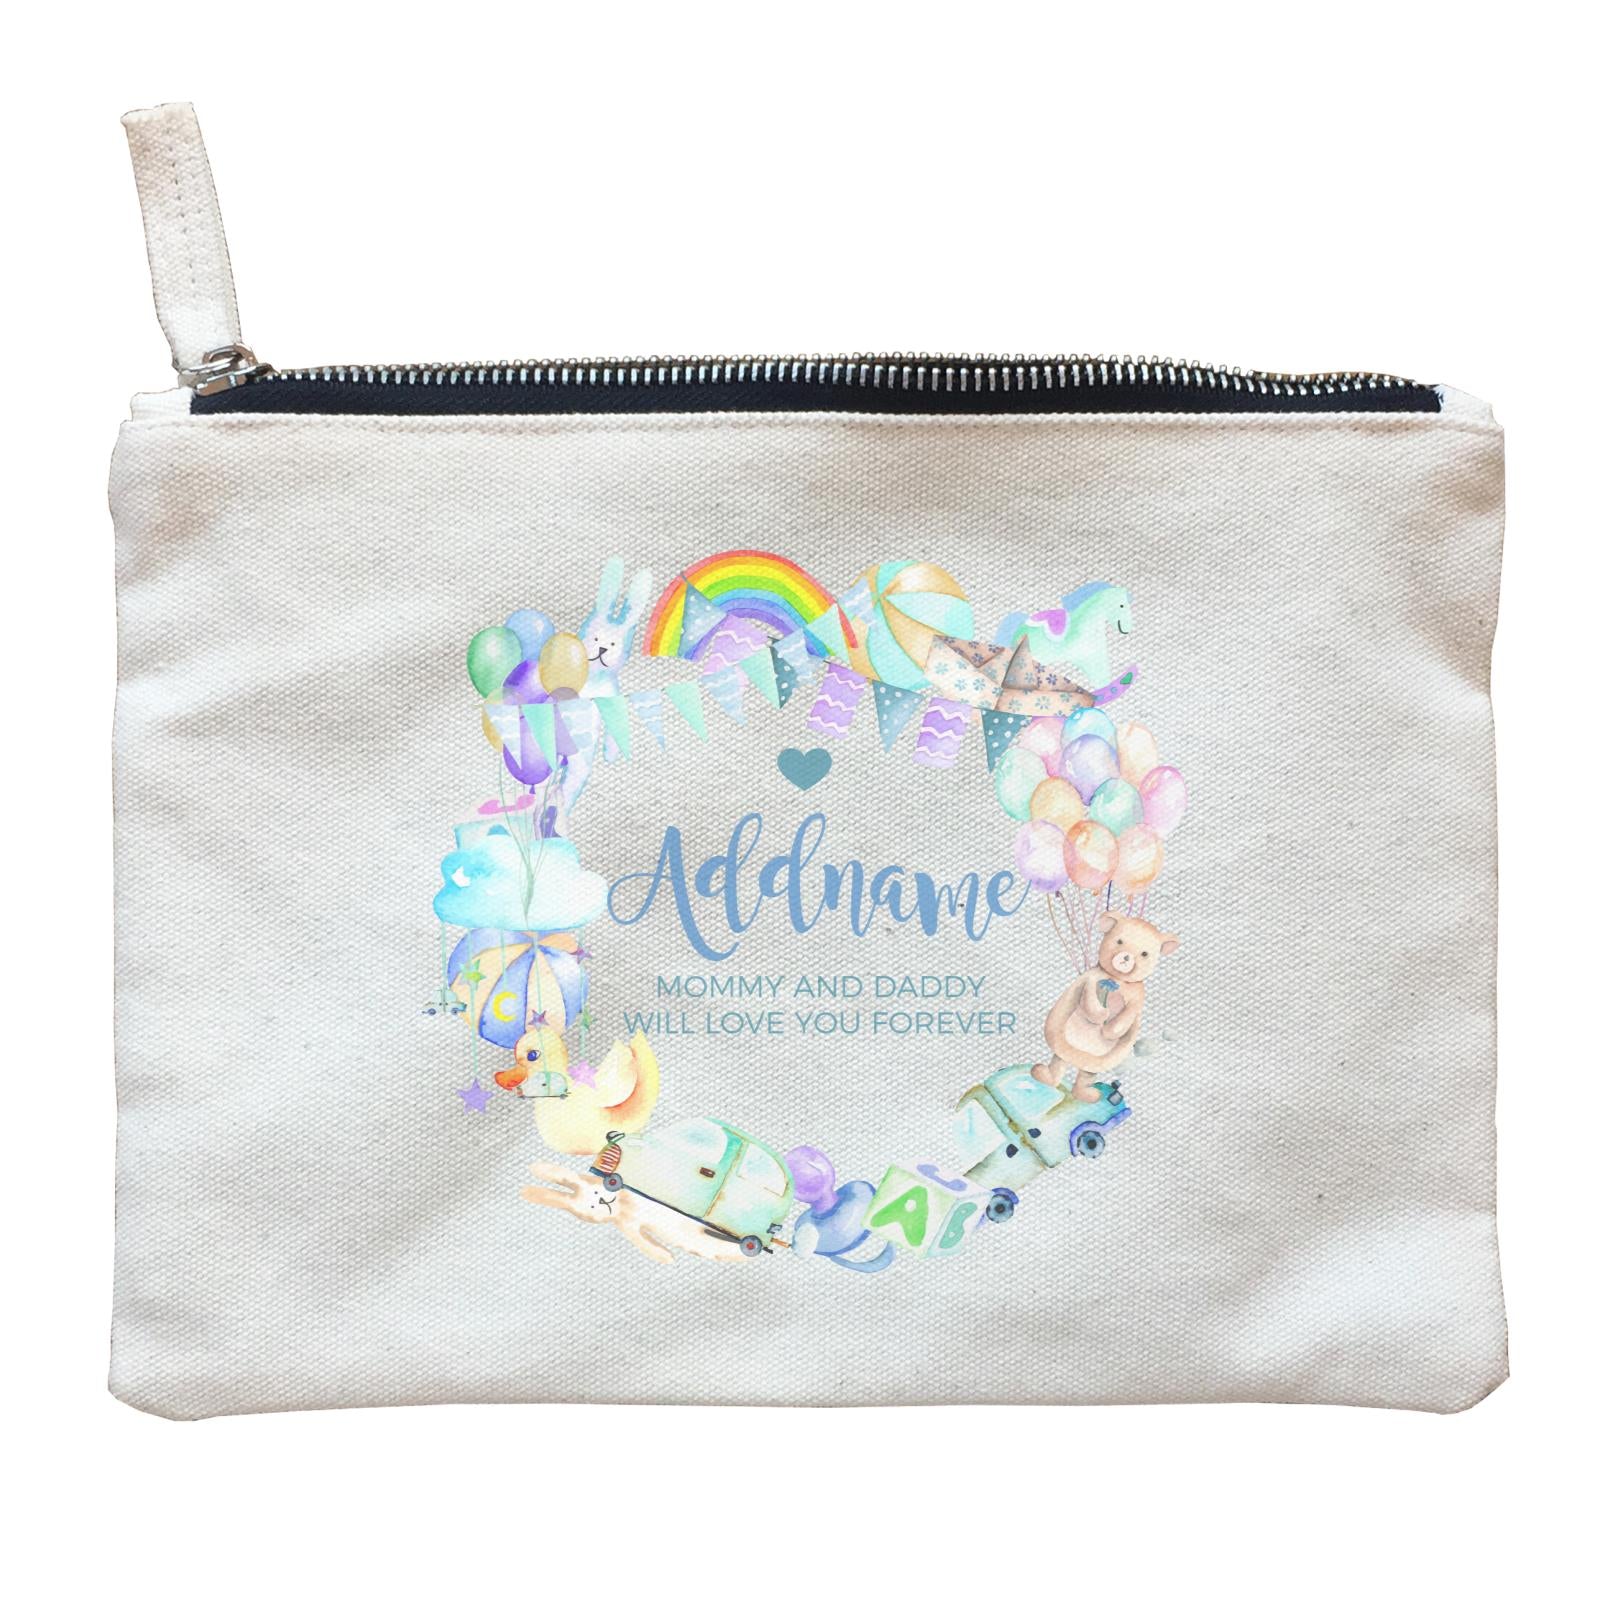 Watercolour Magical Boyish Creatures and Elements Personalizable with Name and Text Zipper Pouch